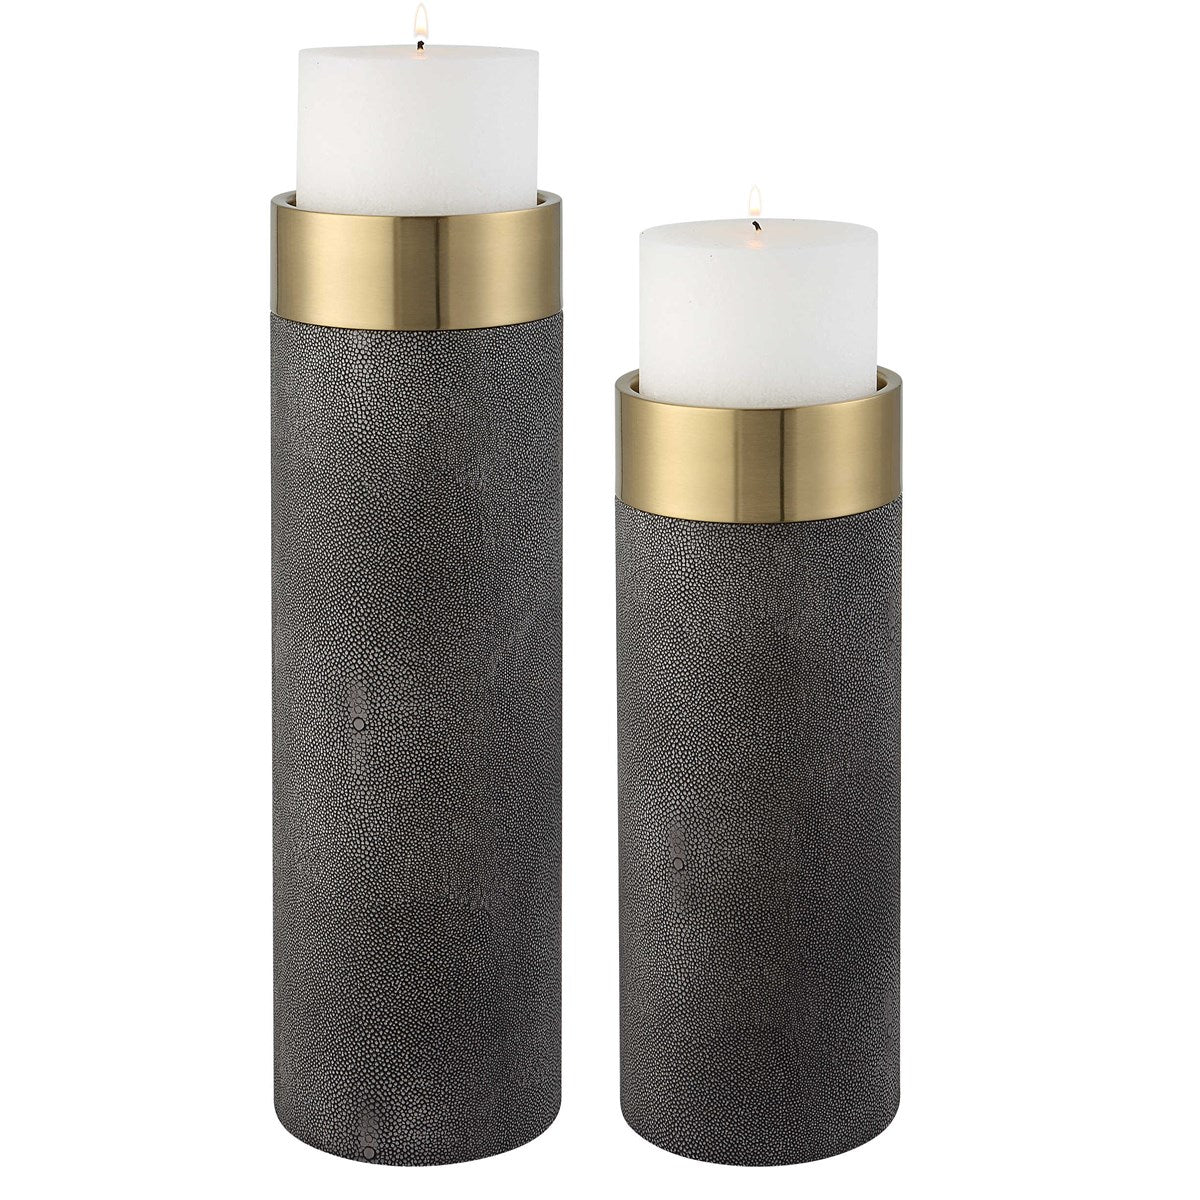 Wessex candleholder set of 2 Gray Faux Shagreen